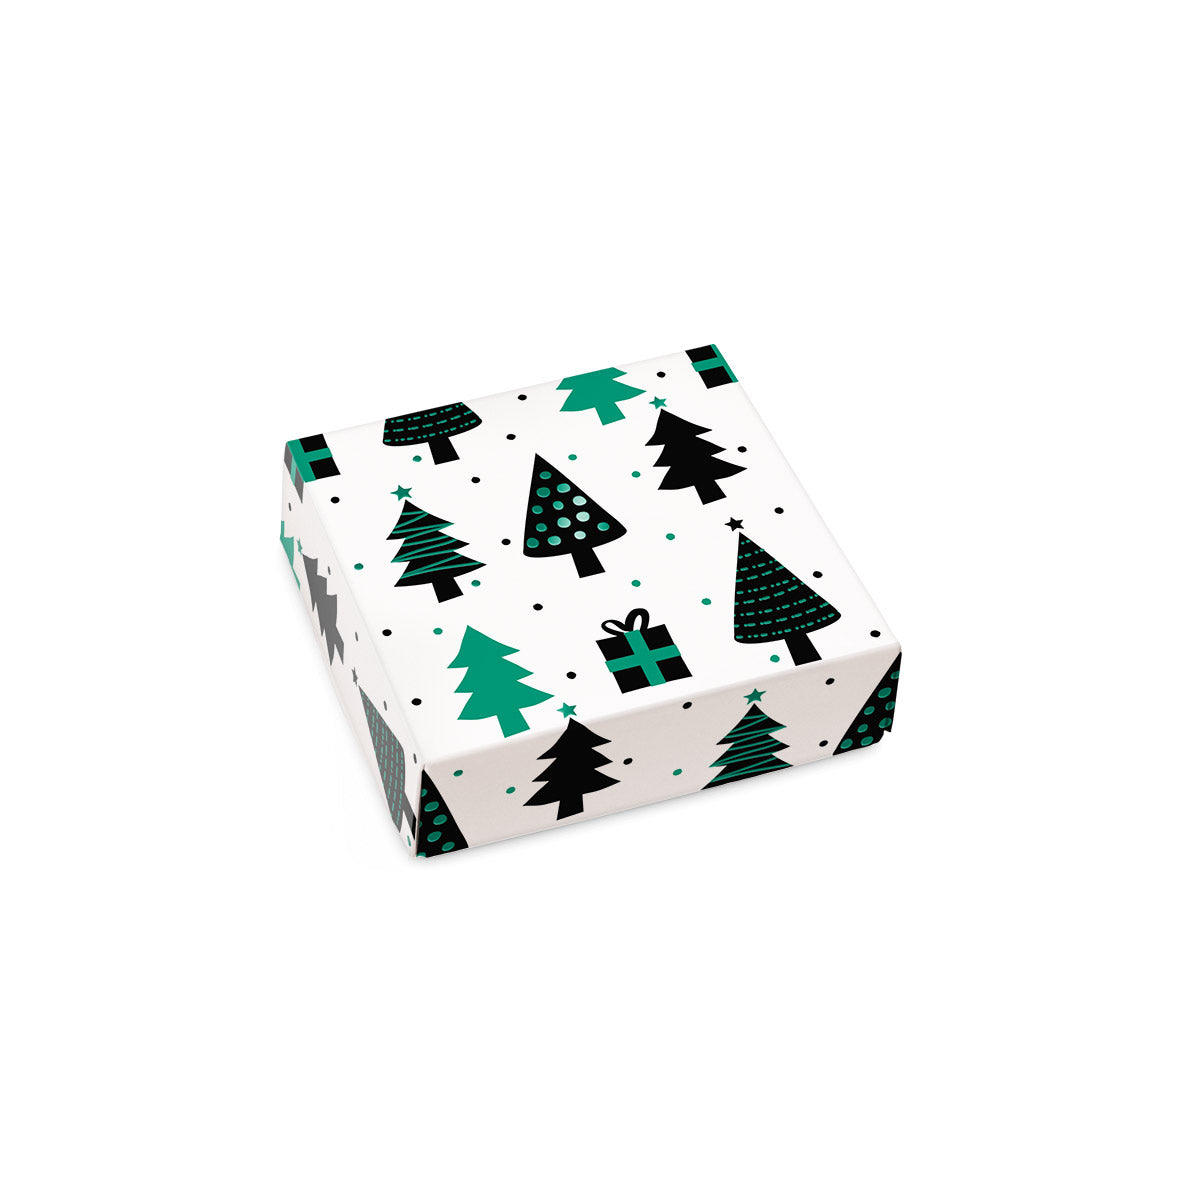 Christmas Tree Themed Box Cover for 9 Piece Holiday Assortment